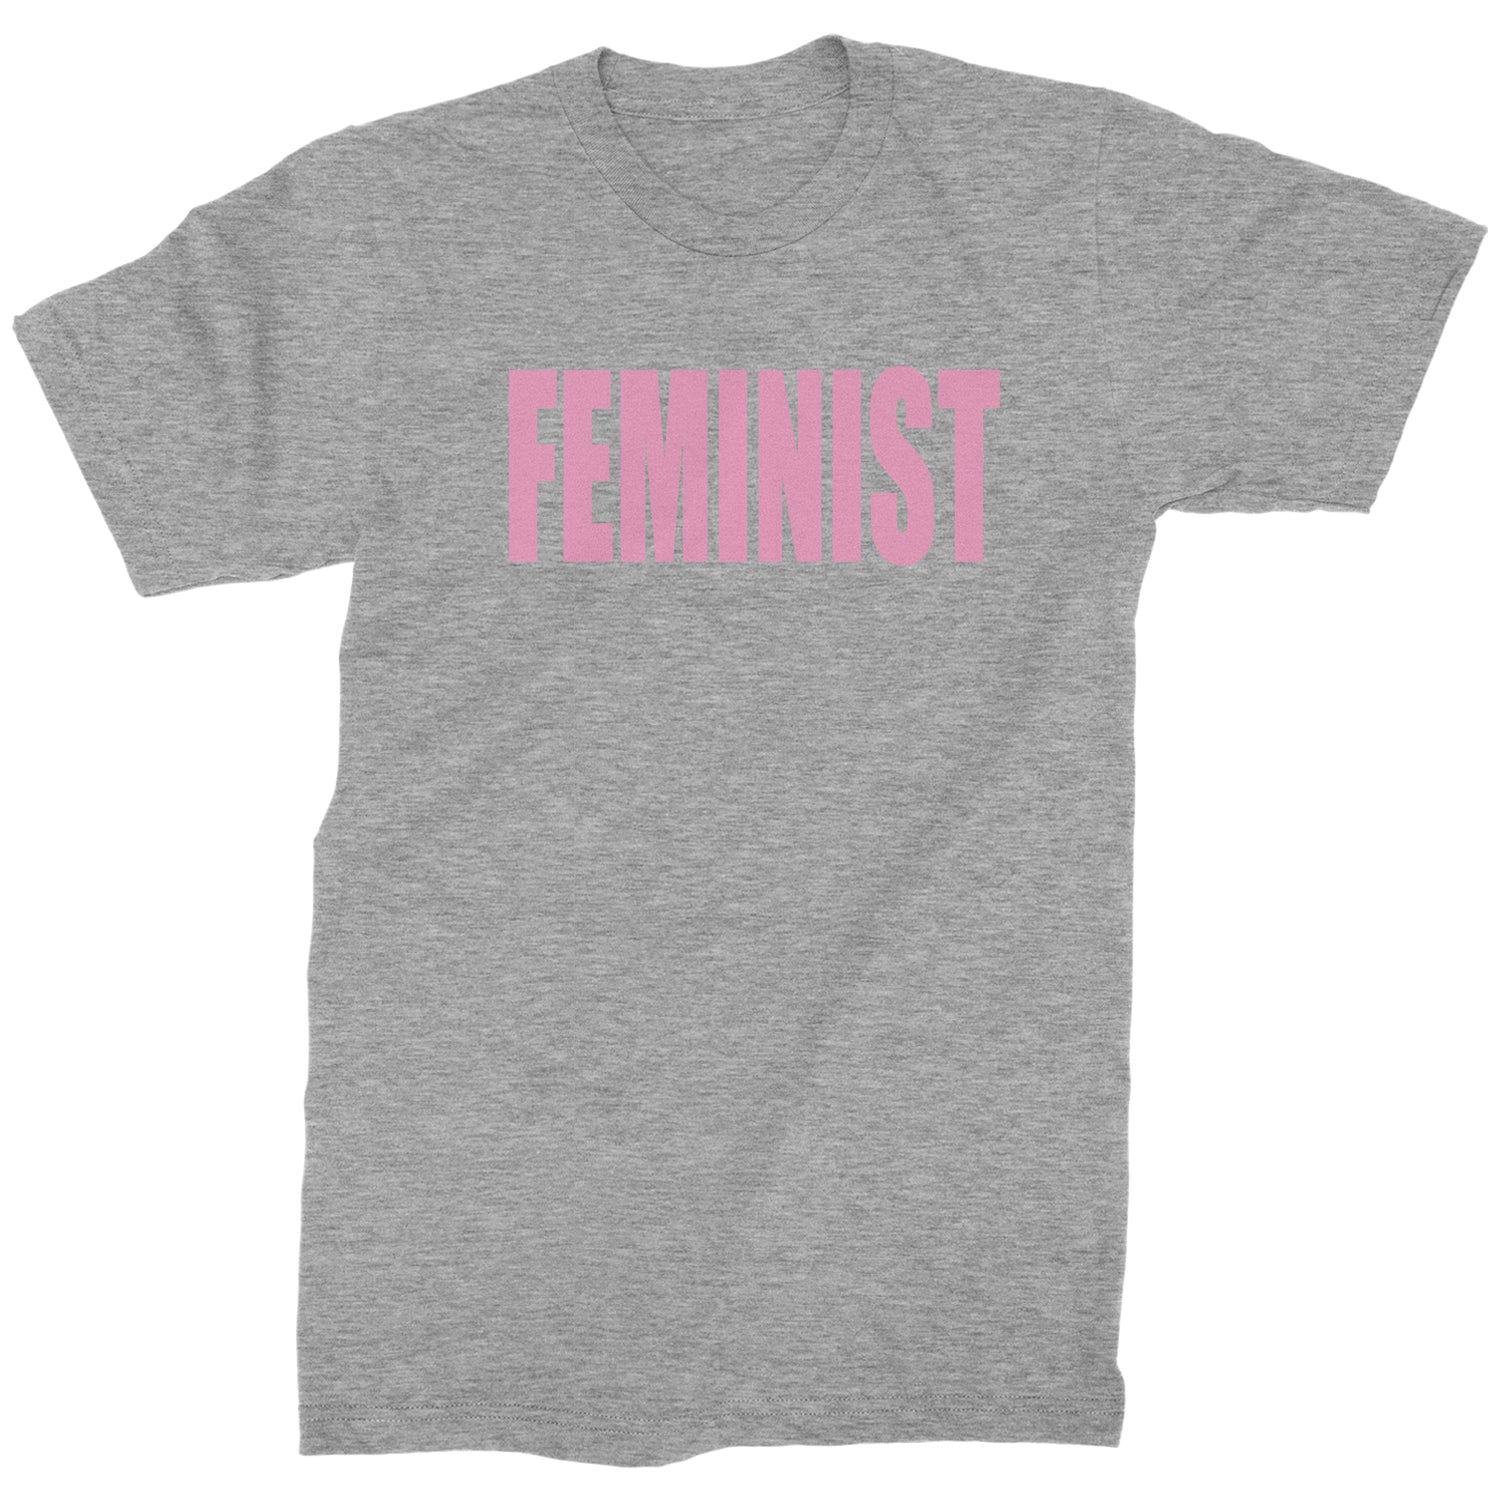 Feminist (Pink Print) Mens T-shirt a, equal, equality, feminism, feminist, gender, is, lgbtq, like, looks, nevertheless, pay, persisted, rights, she, this, what by Expression Tees